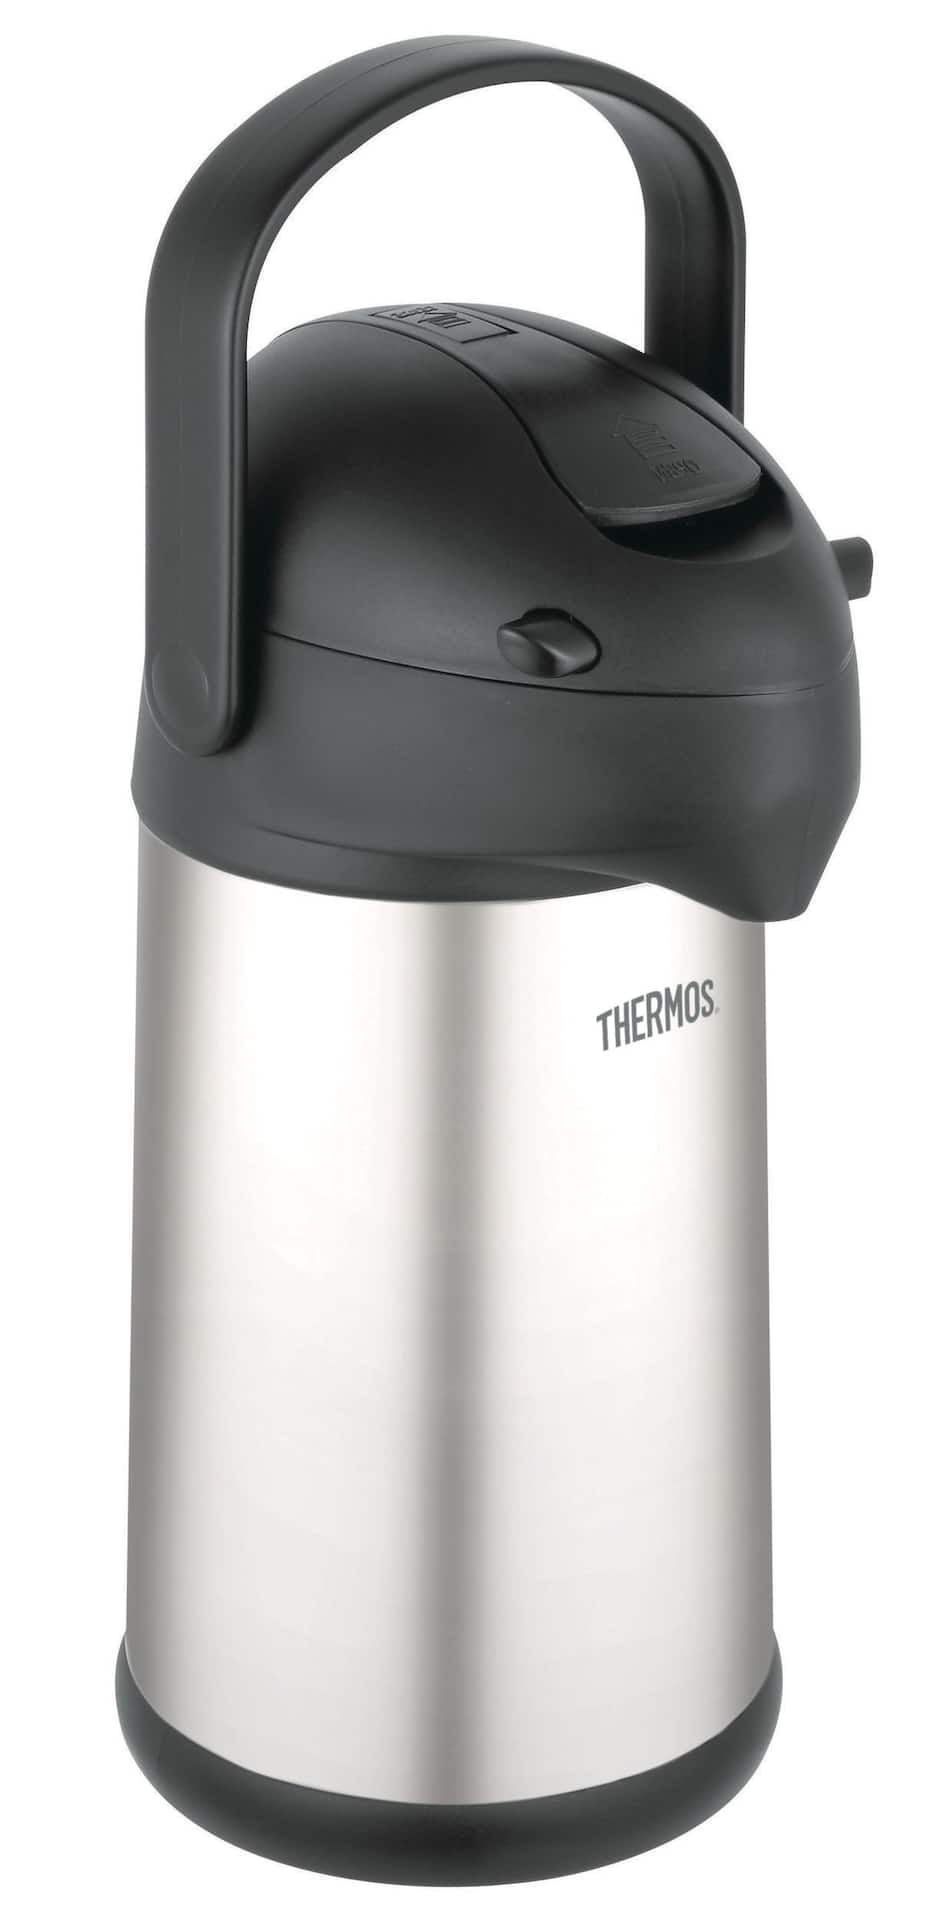 https://media-www.canadiantire.ca/product/living/kitchen/dining-and-entertaining/1421424/thermos-stainless-steel-vacuum-insulated-pump-pot-2-5l-cbafd46d-1b8d-49f5-b2c2-5631e70283e4-jpgrendition.jpg